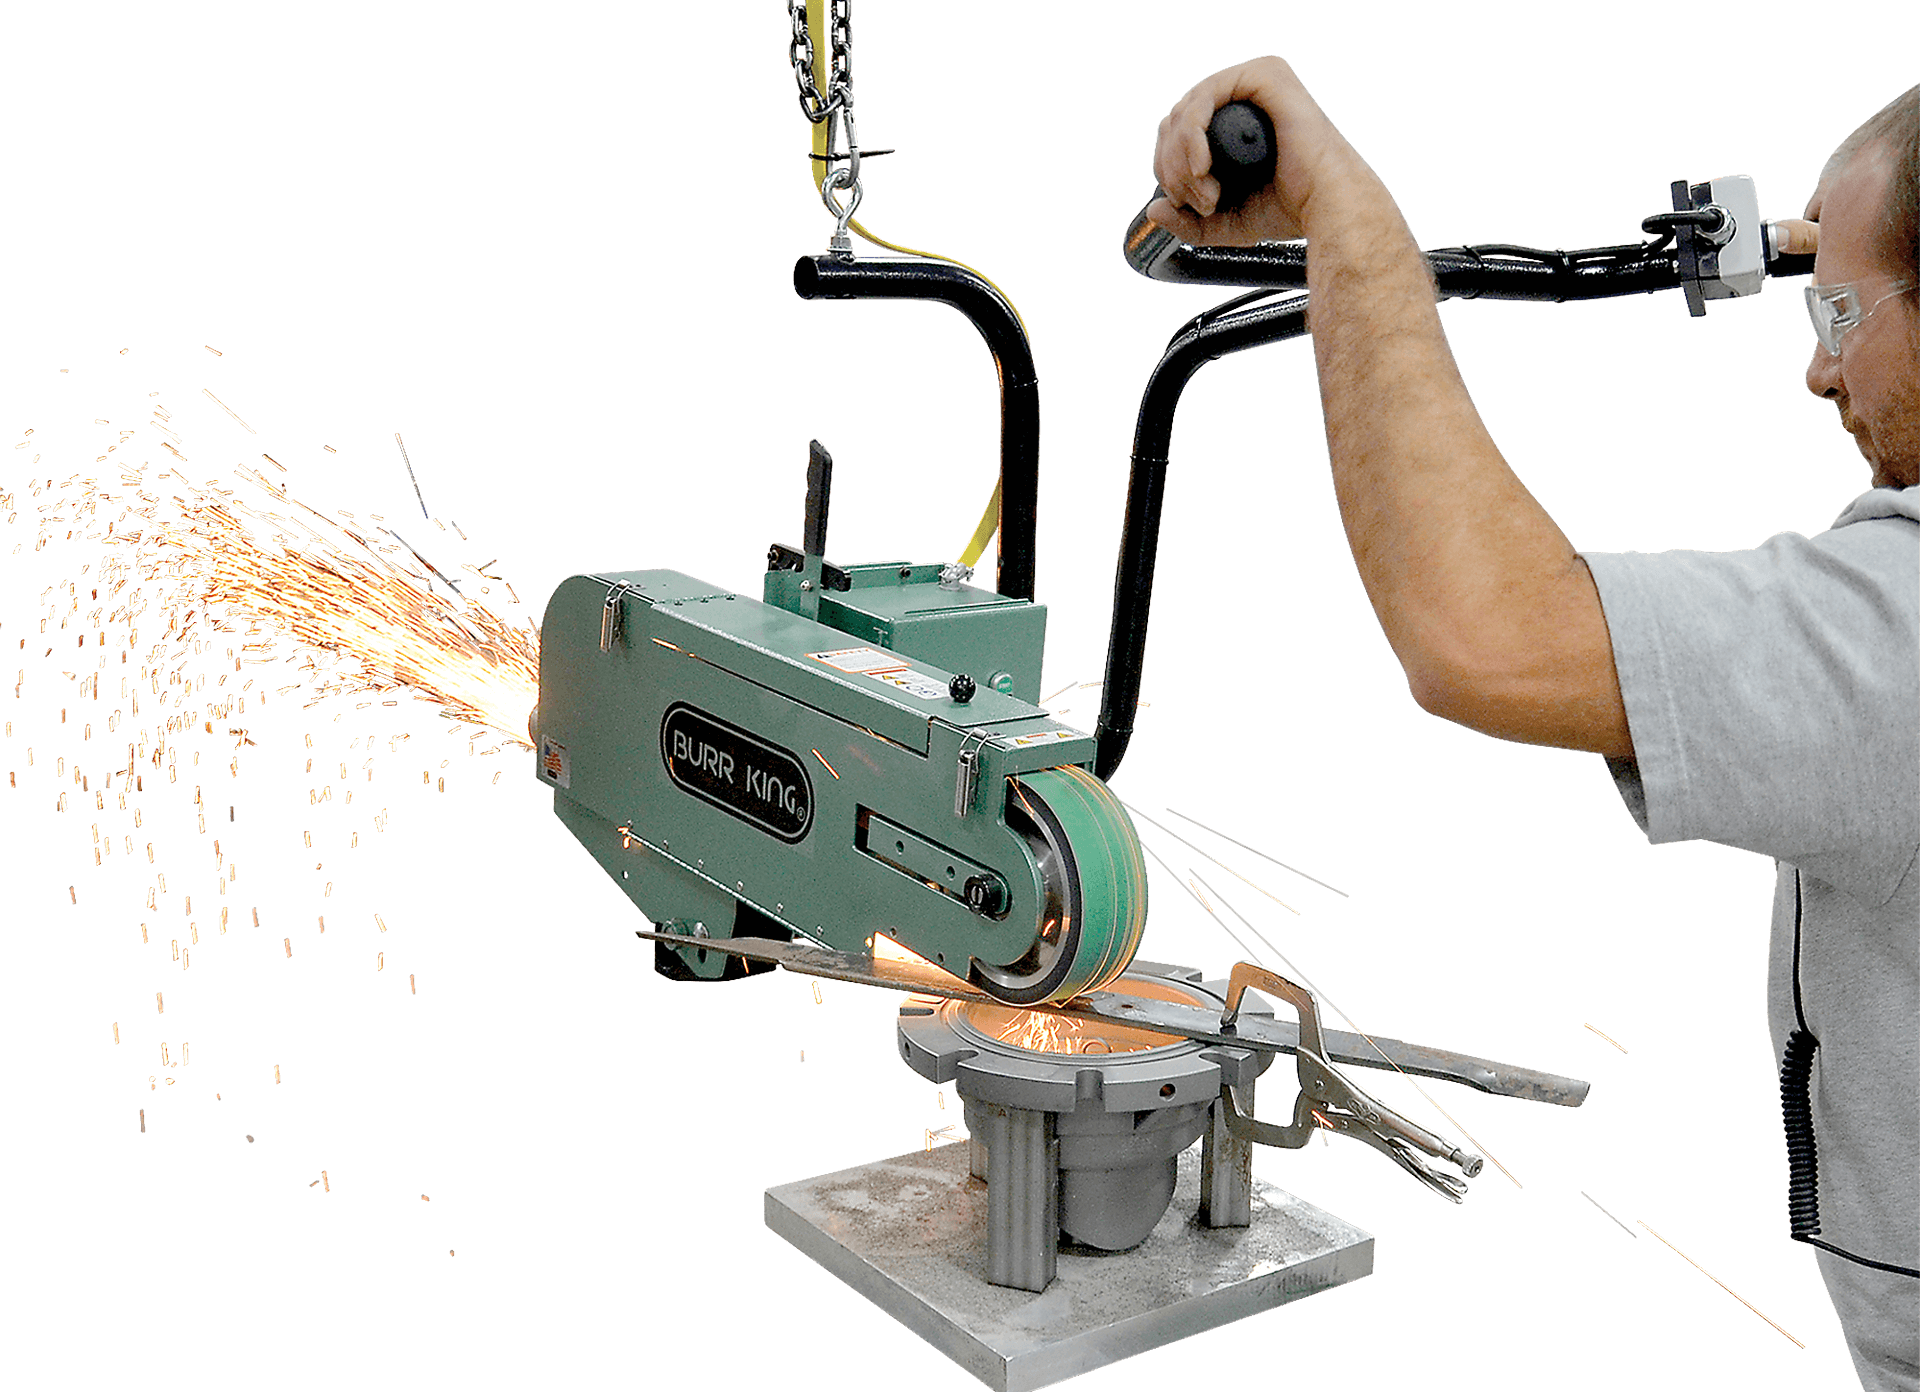 Part too heavy to take to the grinder?  Take the grinder to the part with the Burr King 979 Swing Grinder.  Contact us for the details.